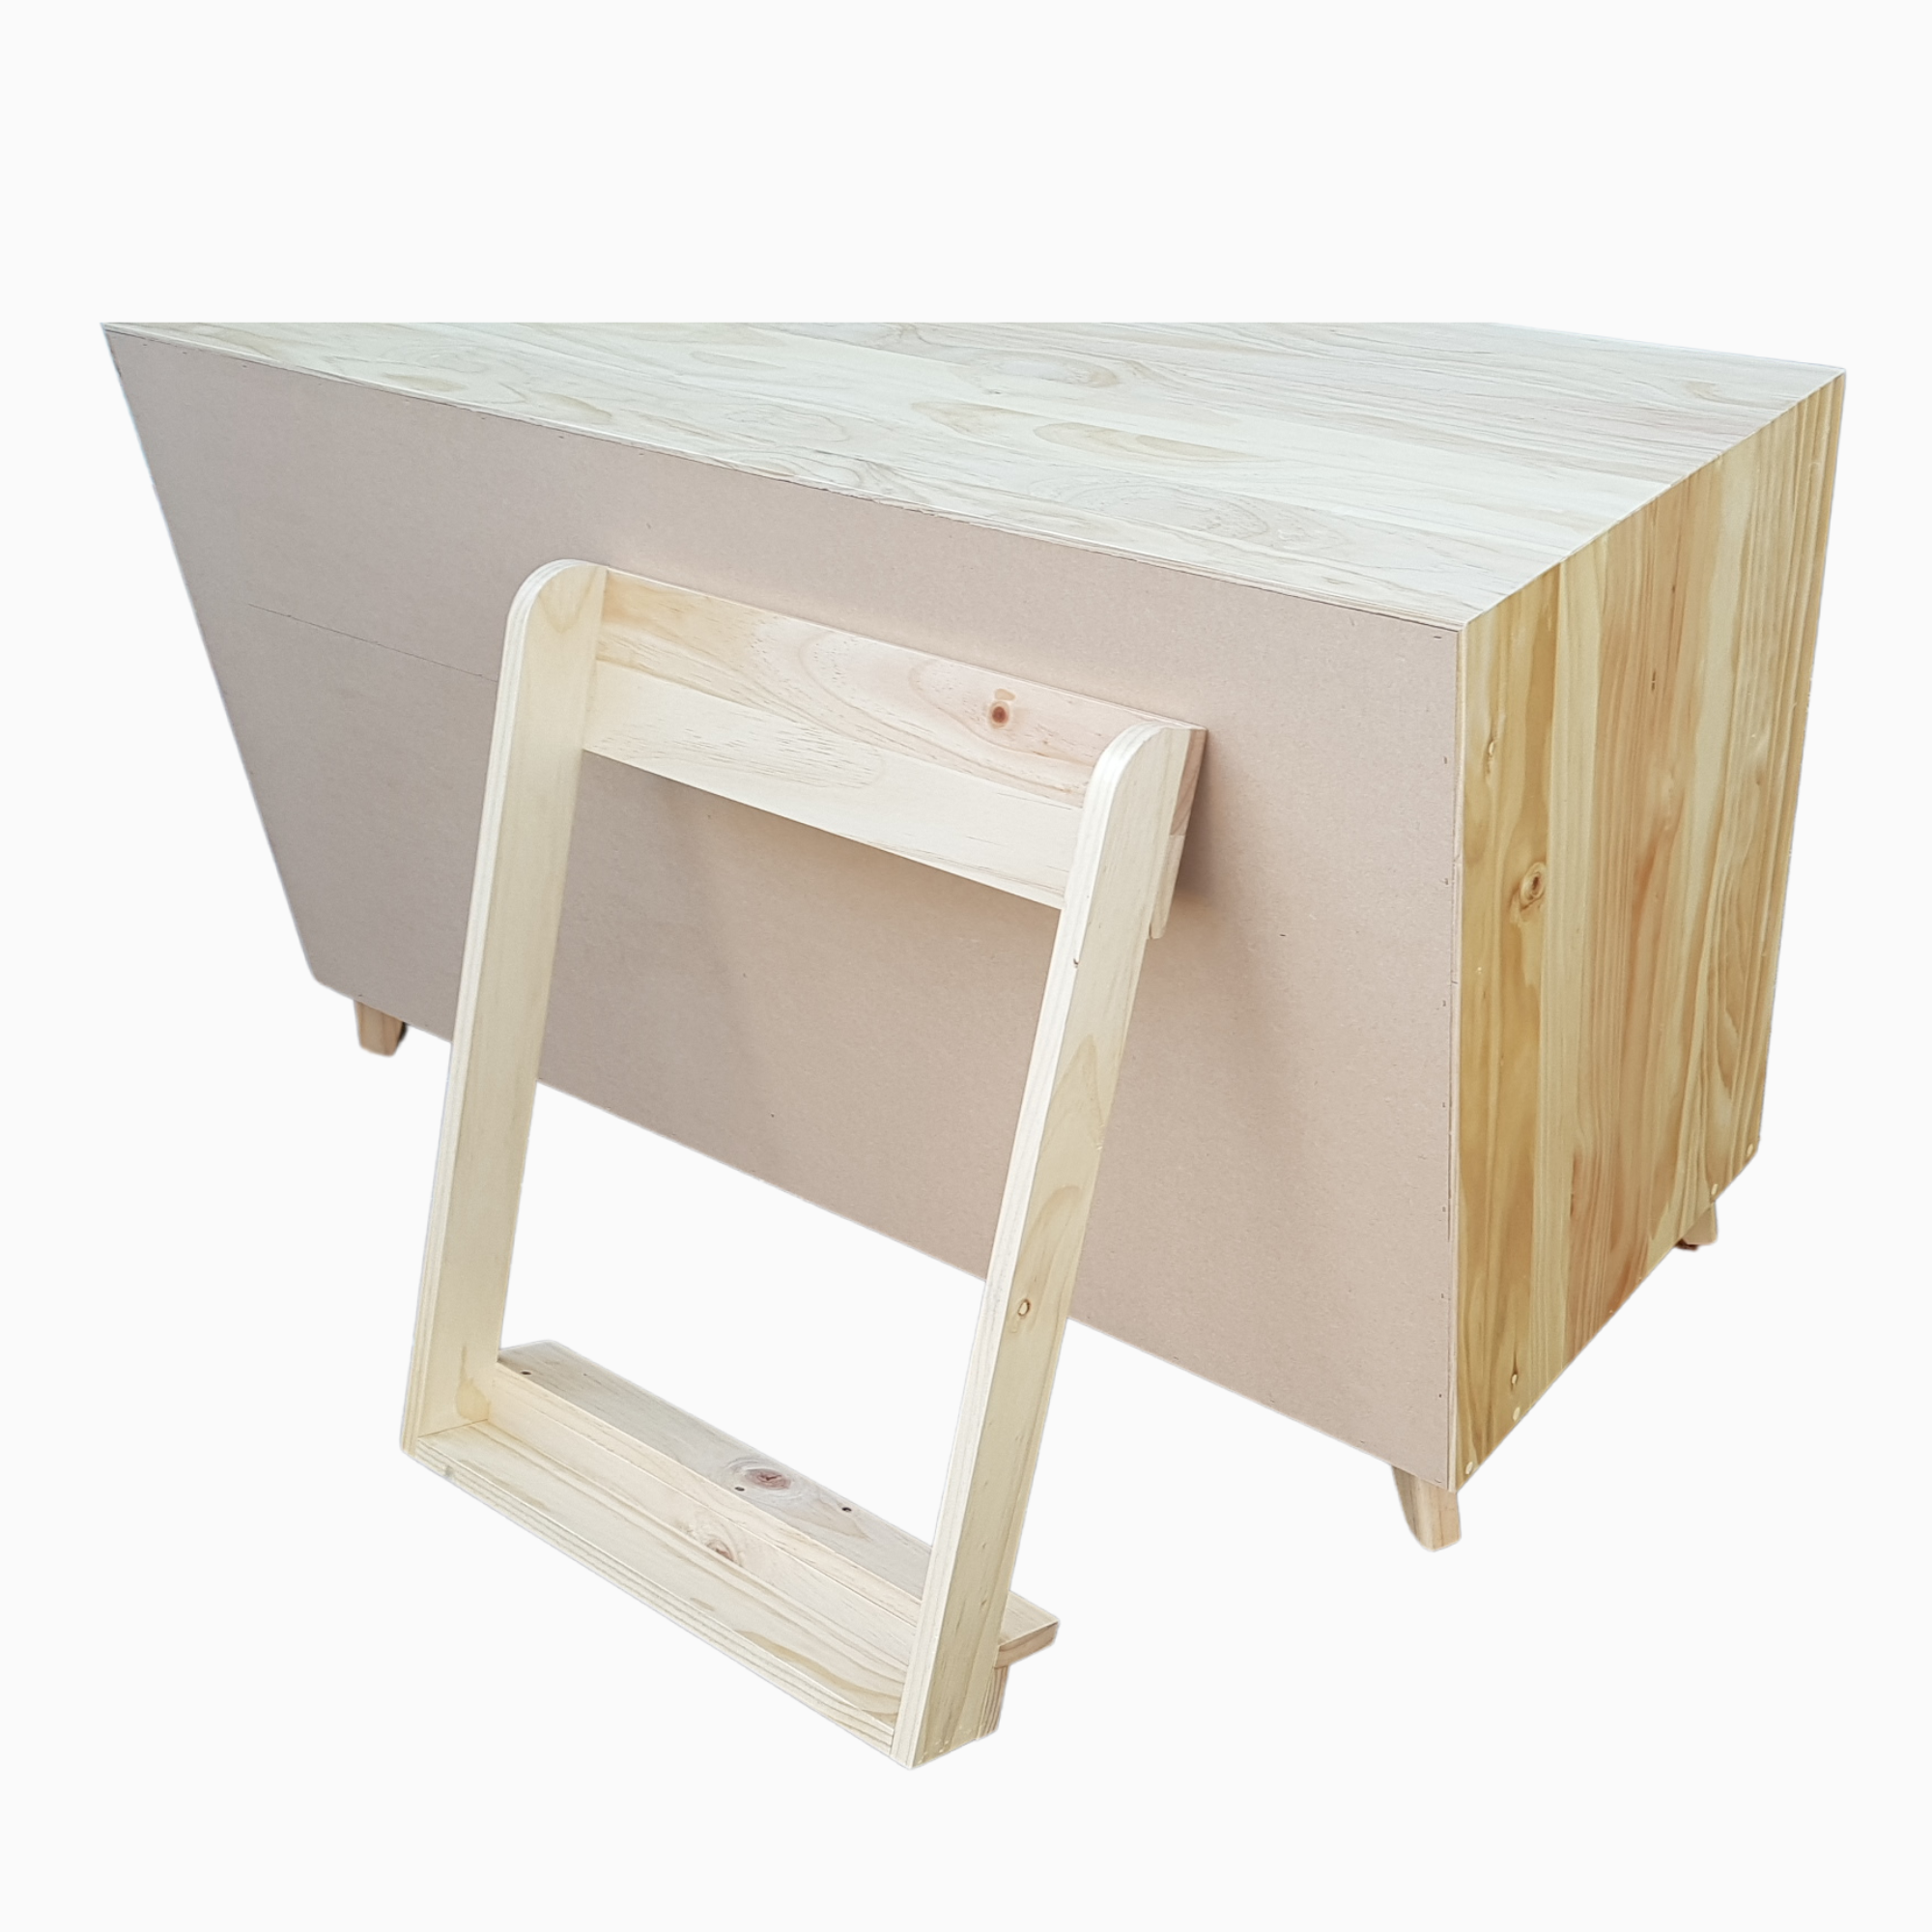 BRIMAR SOLID TIMBER 4 DRAWER LOWBOY WITH A DETACHABLE CHANGING TABLE